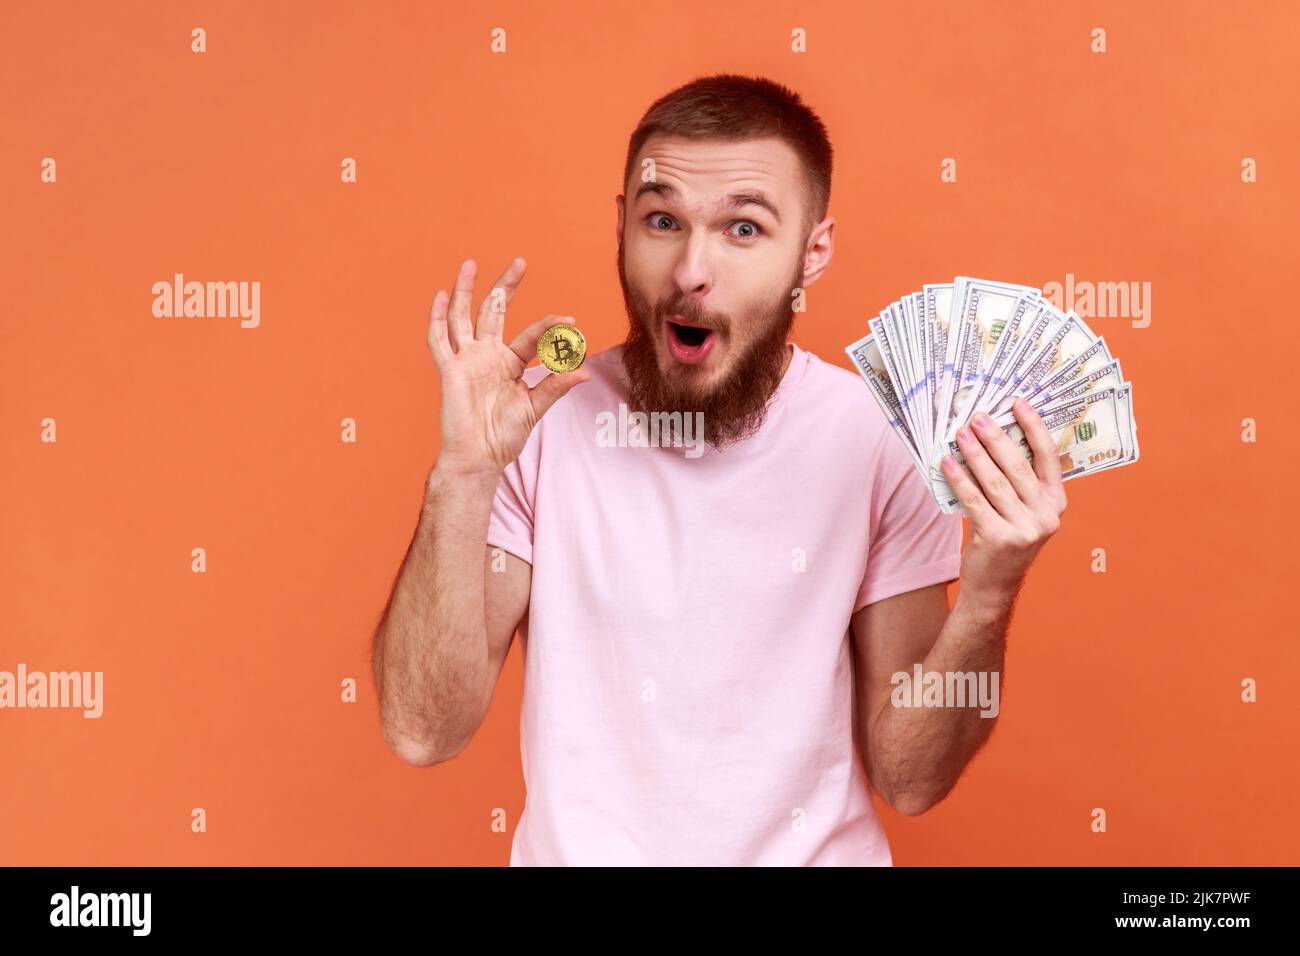 Portrait of bearded man holding bitcoin and dollar banknotes, looking at camera, astonished profit from cryptocurrency, wearing pink T-shirt. Indoor studio shot isolated on orange background. Stock Photo